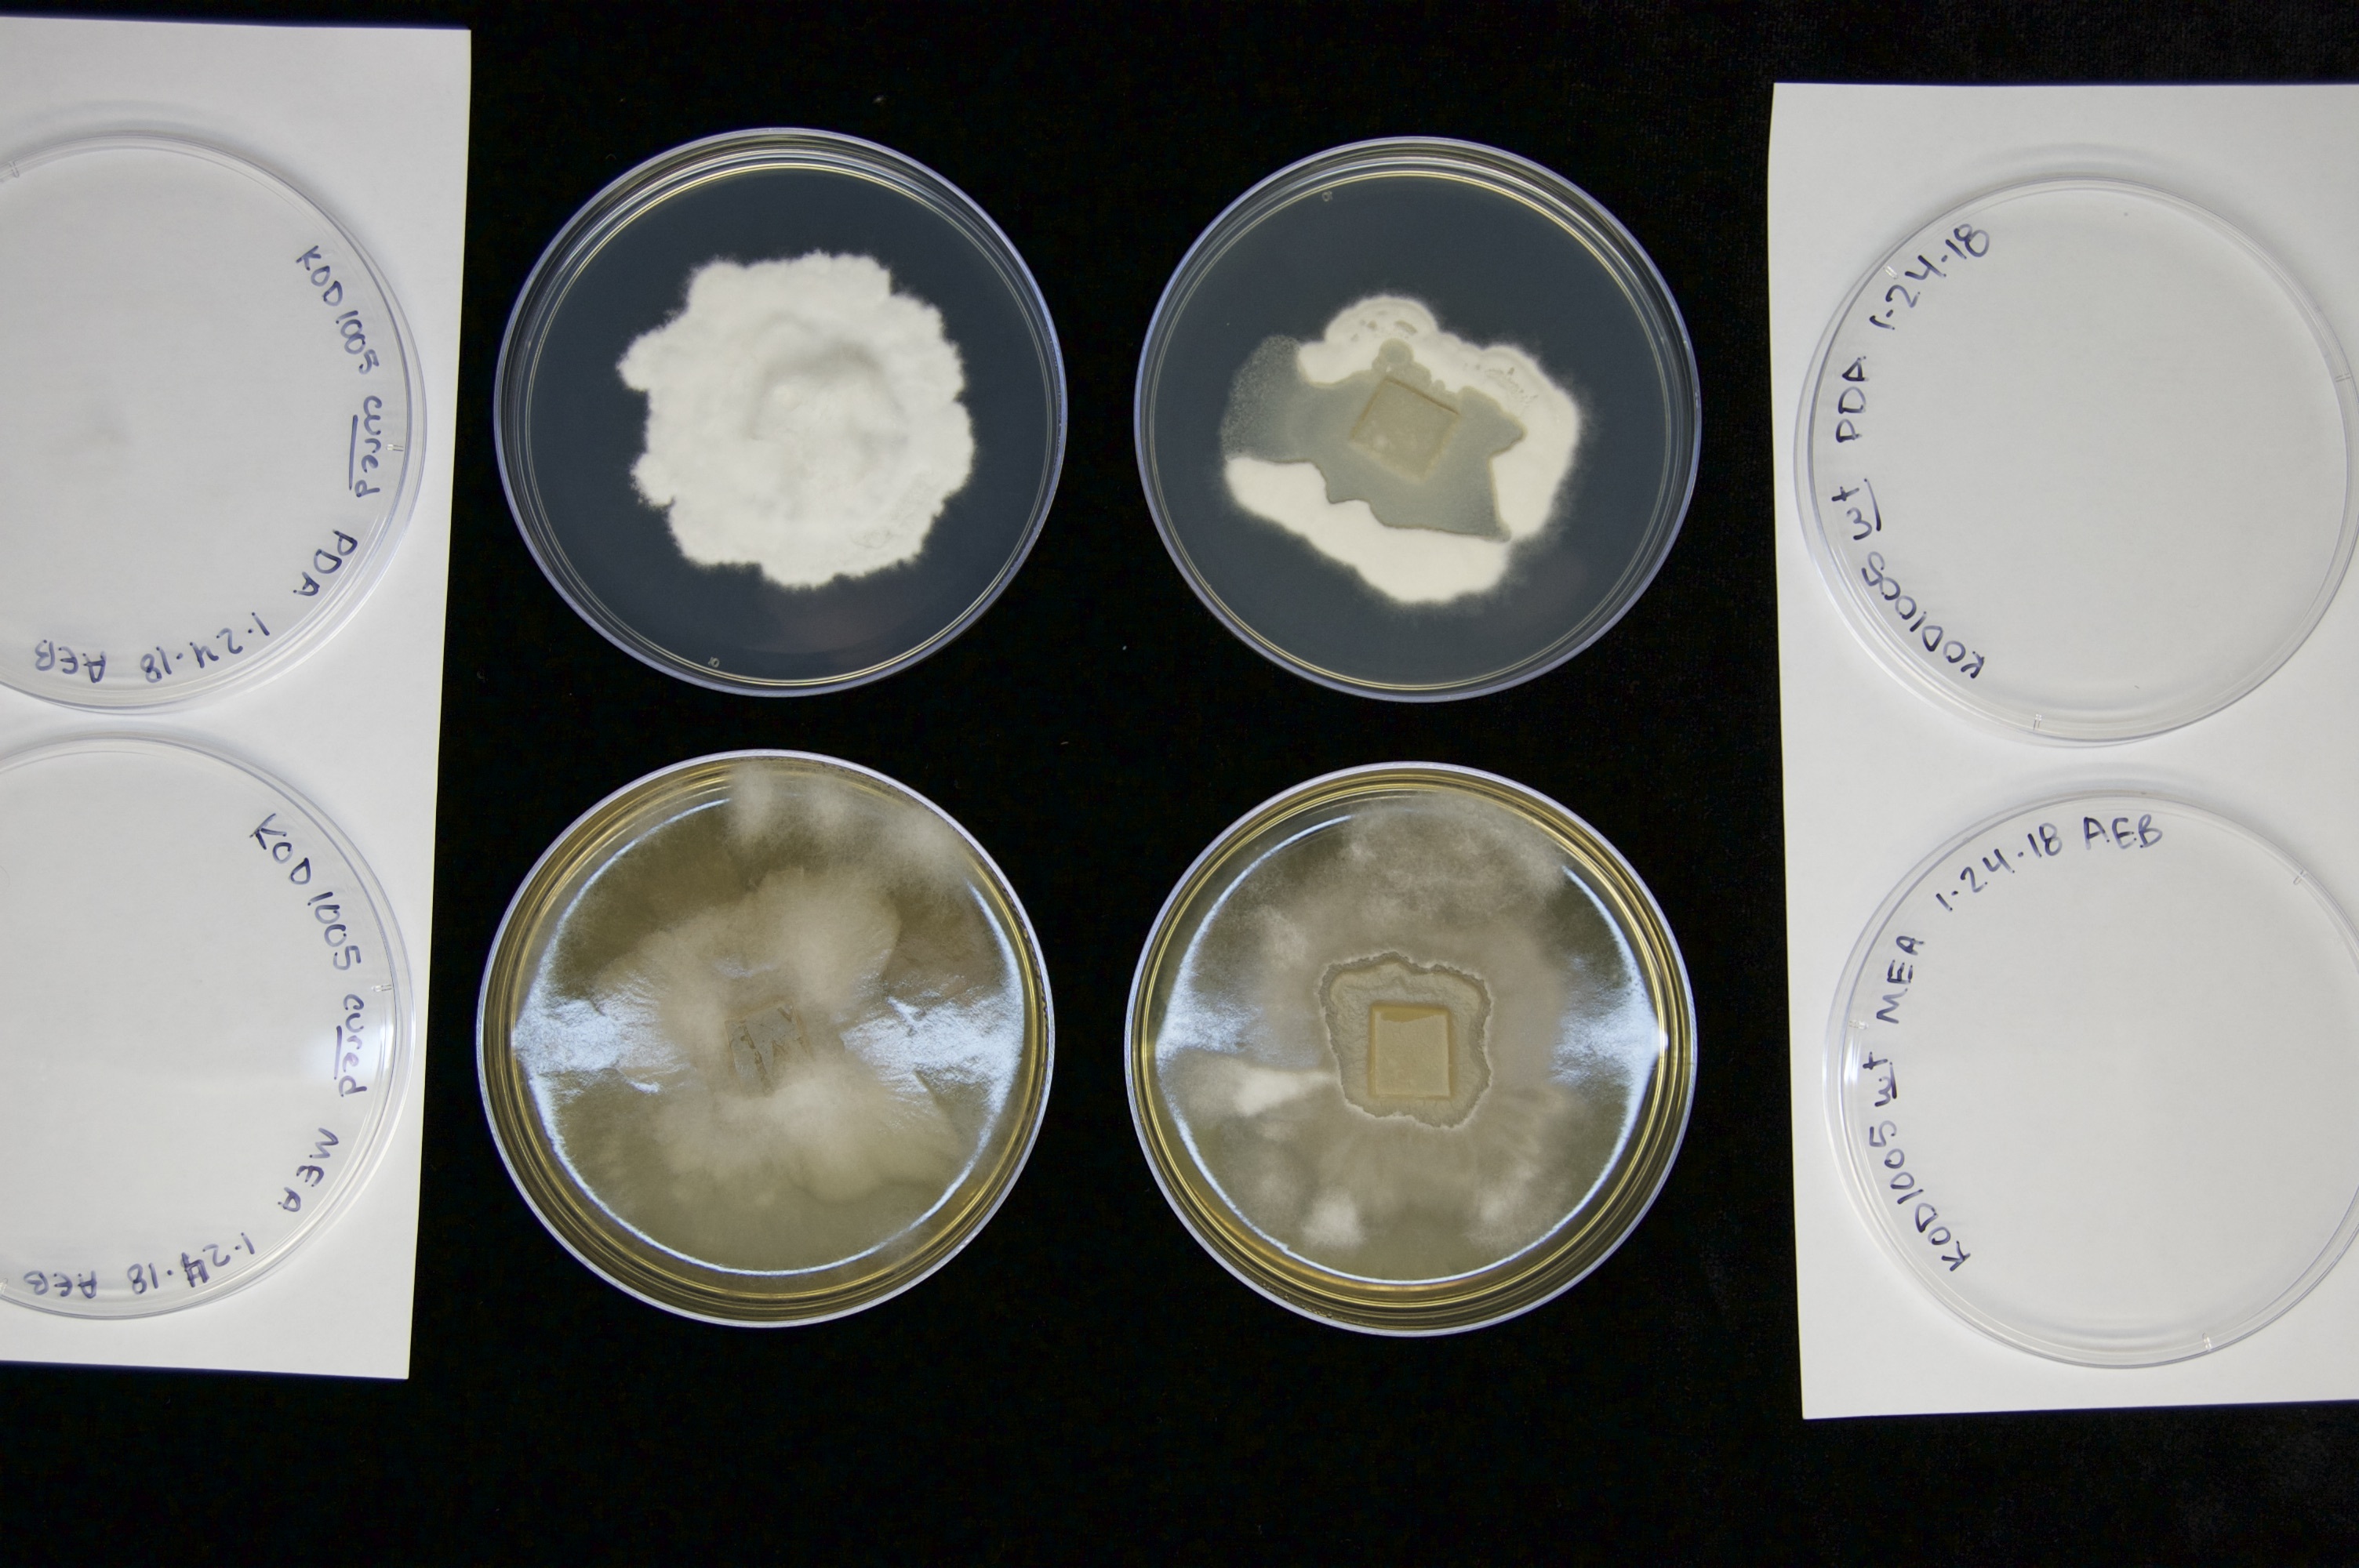 Growth of Mortierella alpina KOD1005 on either PDA (top) or MEA (bottom), with bacteria absent (left) or present (right). Image by Abby Bryson (@ae_bryson on Twitter).